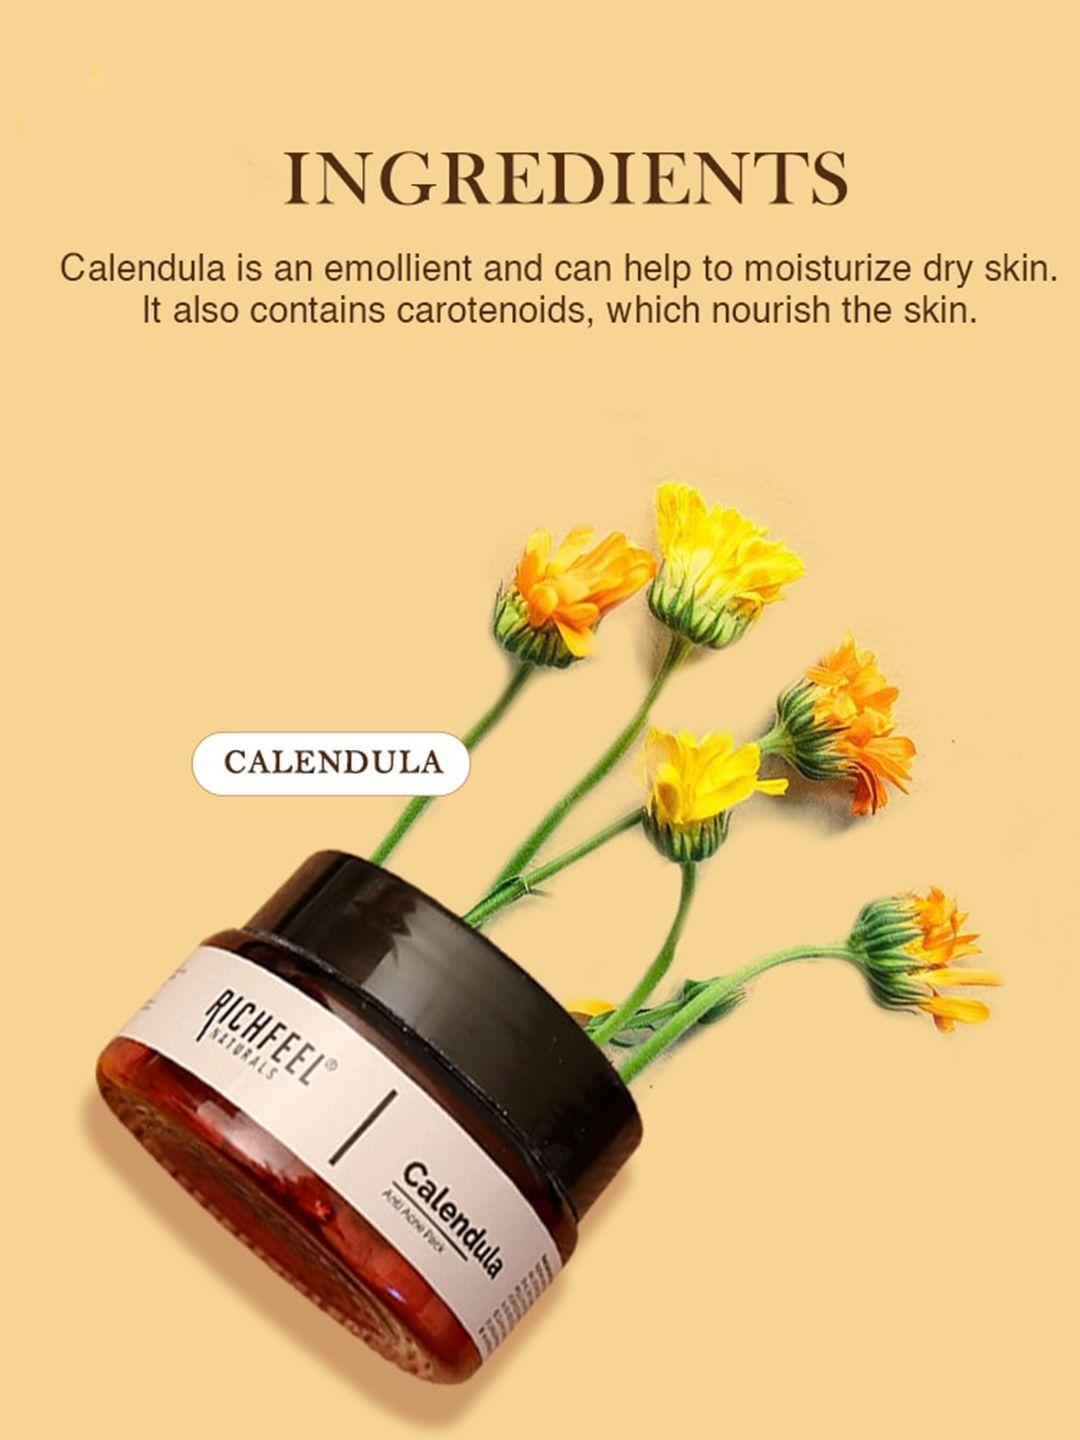 richfeel set of 2 calendula anti-acne face pack with kaolin clay - 50g each